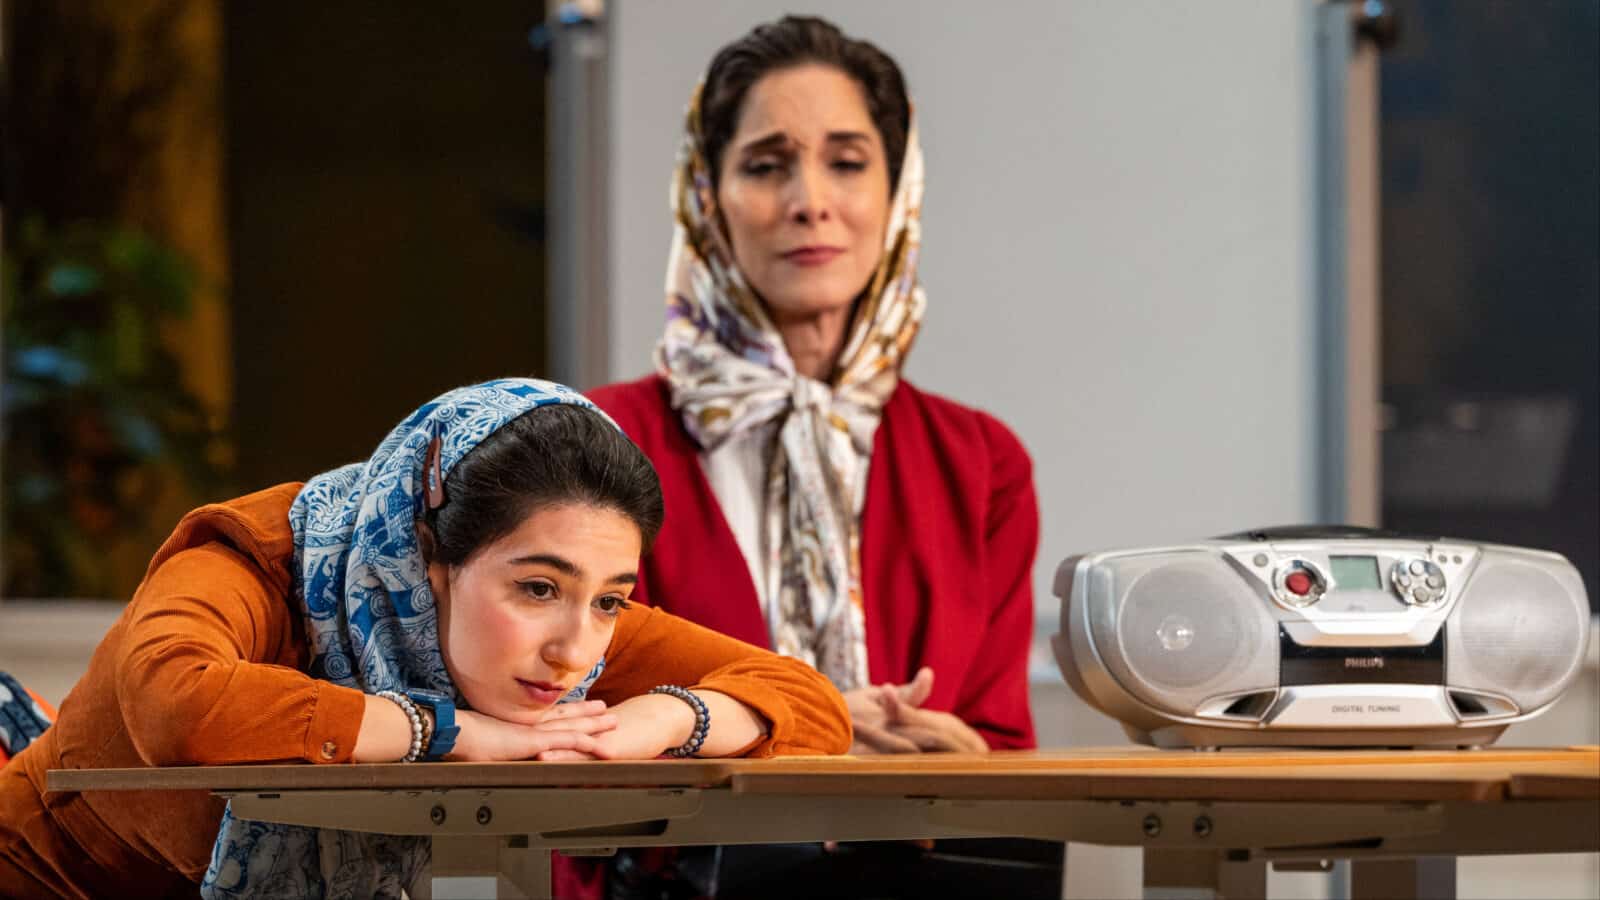 Pooya Mohseni as Roya looks on with kindness and humor as Narges Kalogli rests her chin on her hands and her head on a classroom table as Goli, a student in Iran, in Sanaz Toossi's play 'English' at Barrington stage. Press photo courtesy of BSC